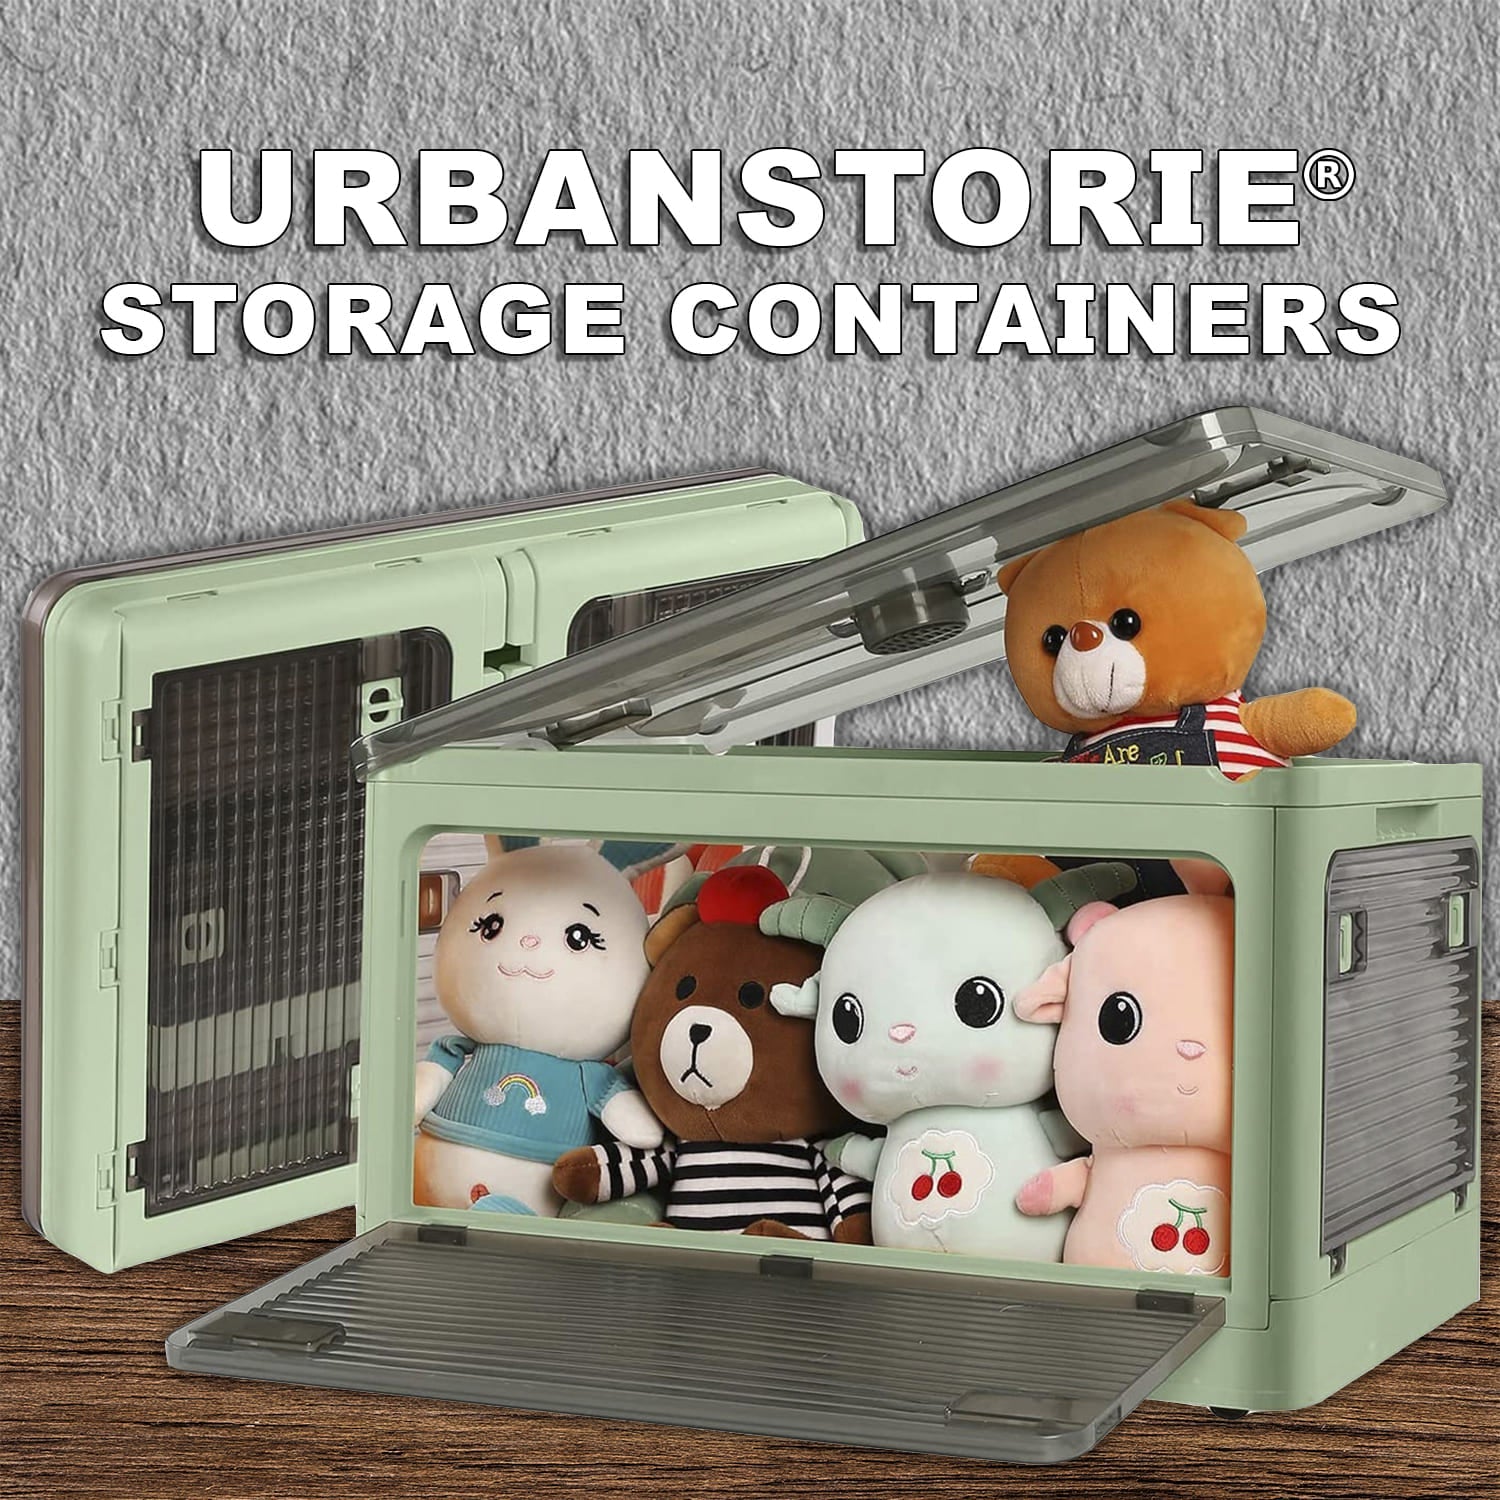 UrbanStori Plastic Storage Containers, Store your Clothes, Sarees, Blankets, Winter Items, Toys or any Home Items